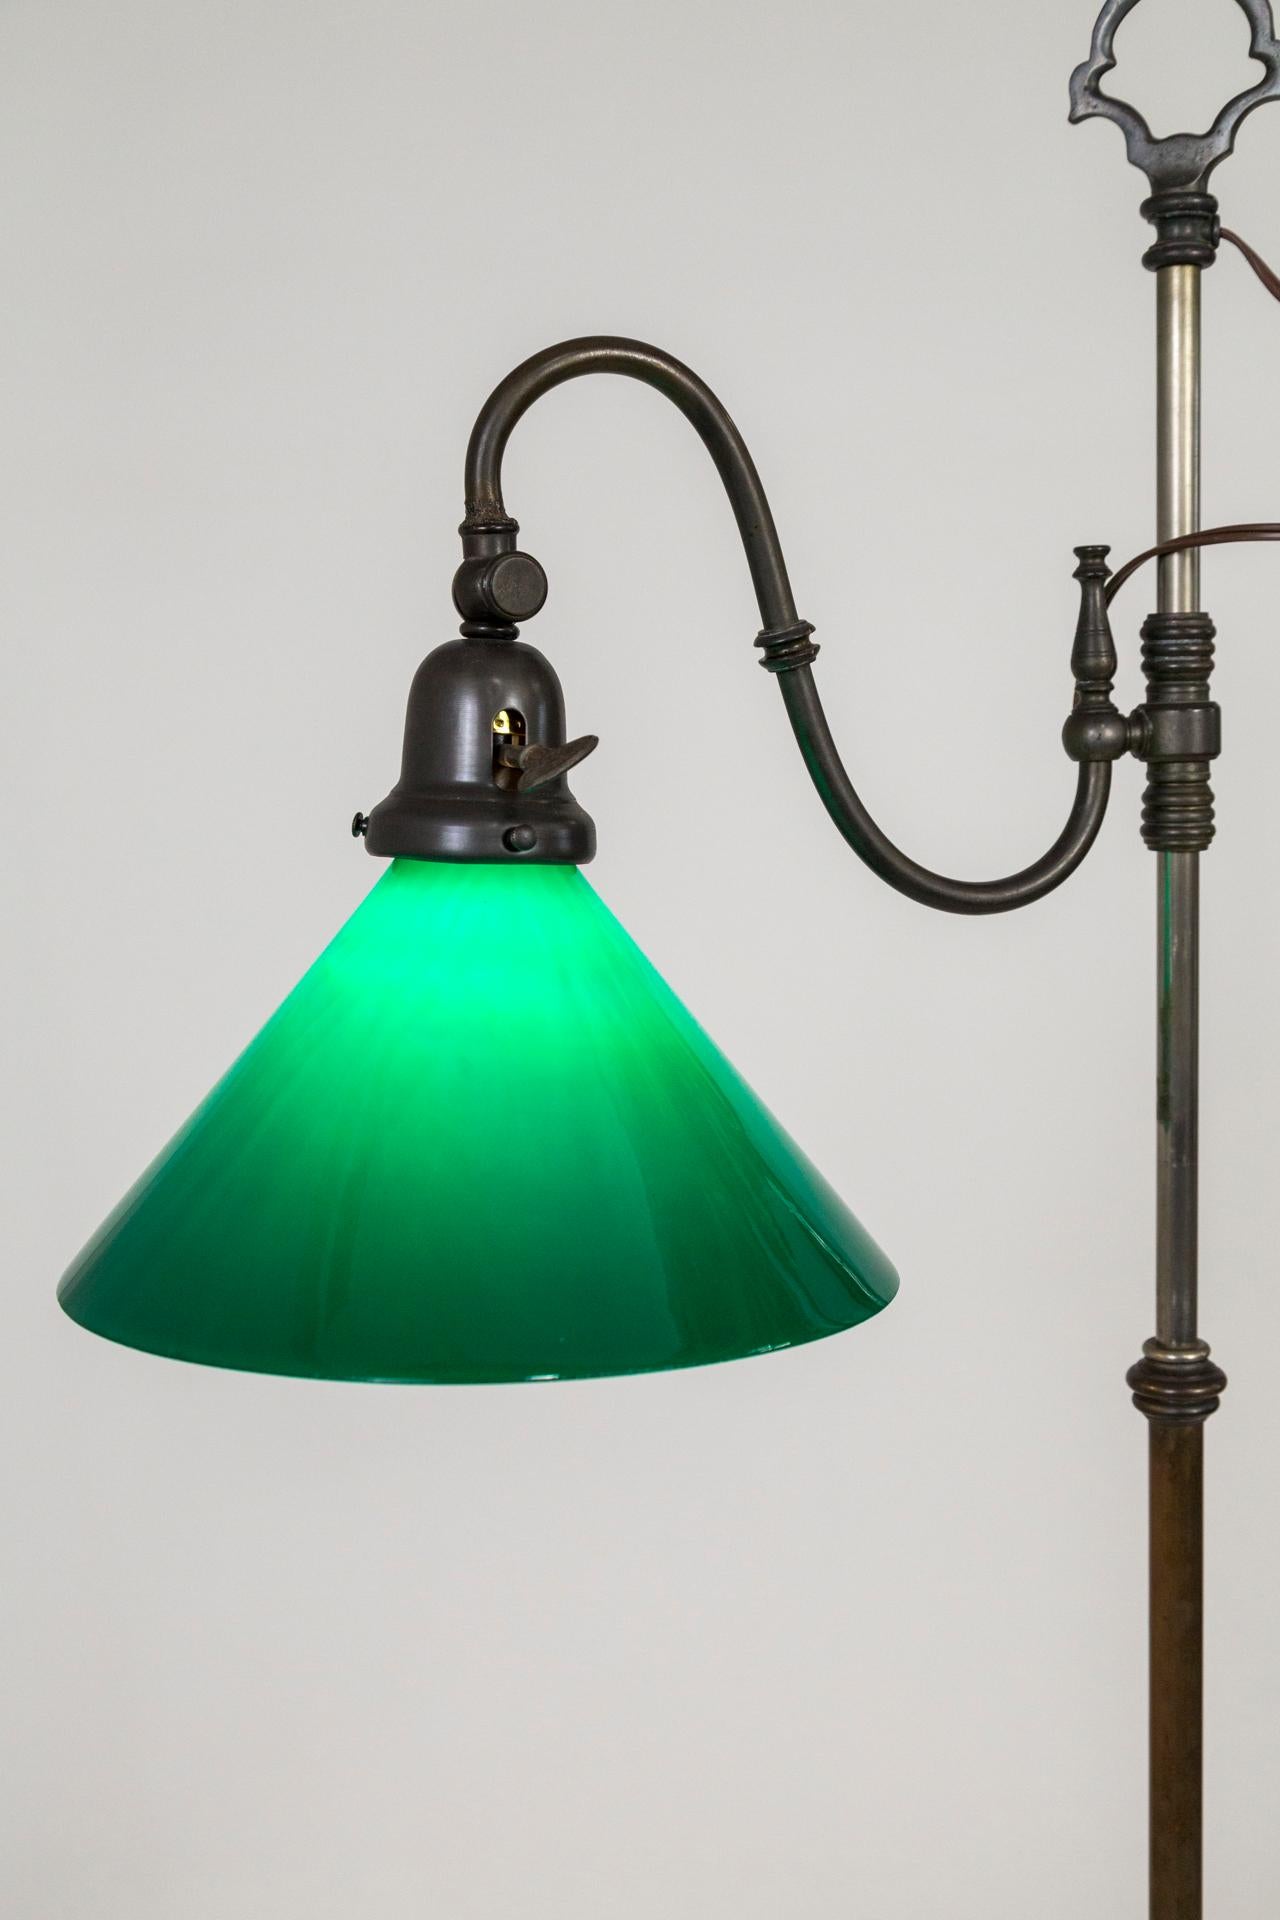 American 1930s Adjustable Paw Foot Floor Lamp with Green Glass Shade